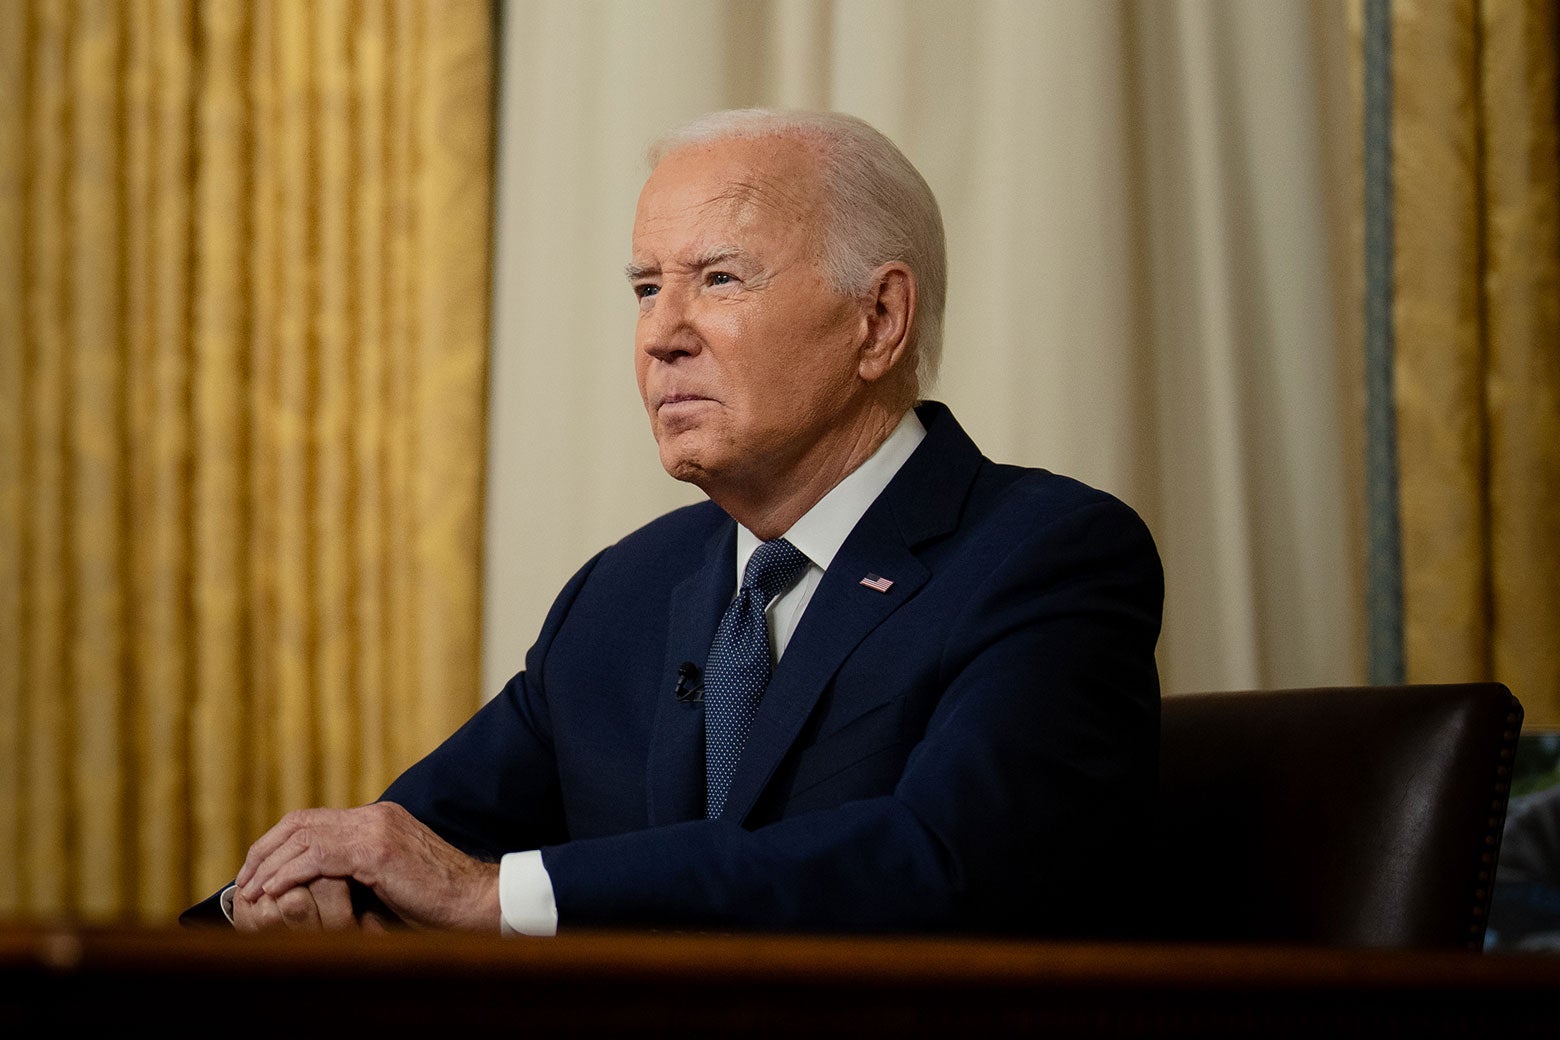 Biden Fumbles Words, Loses Place More Than 10 Times in Short Oval Office Speech About Assassination Attempt